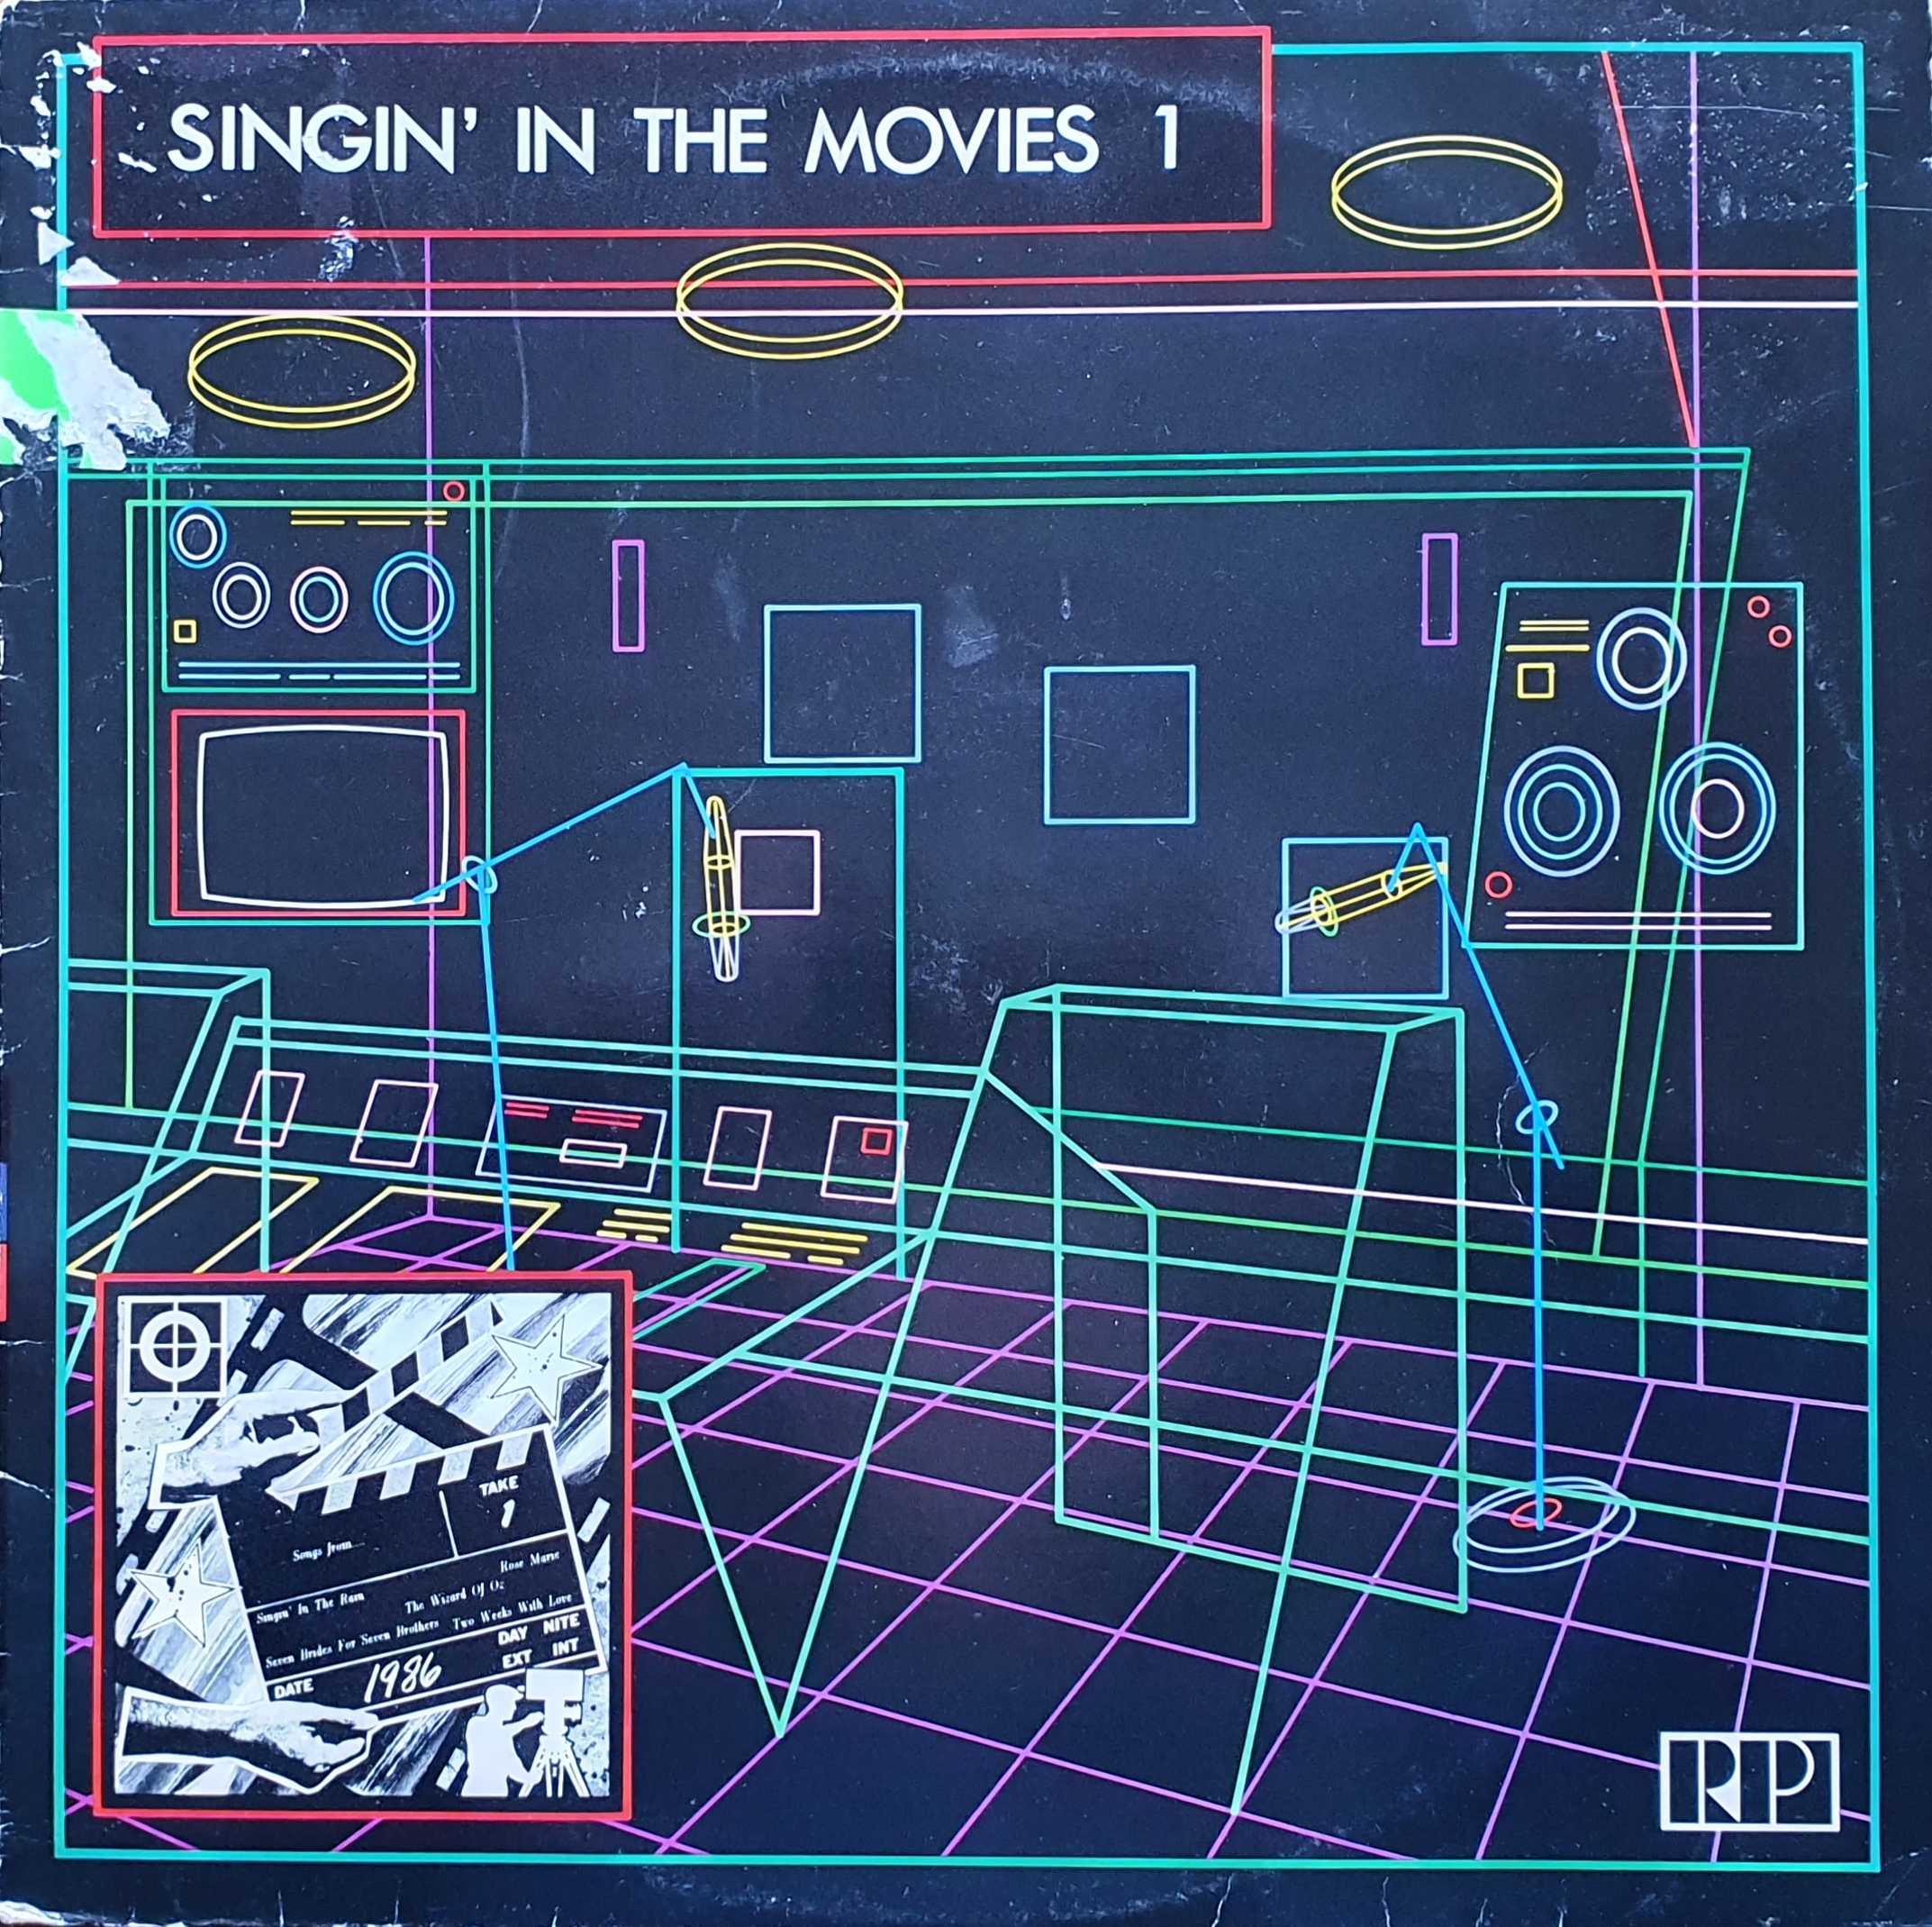 Picture of TAIR 87011 Singin' in the Movies 1 by artist Various from the BBC albums - Records and Tapes library